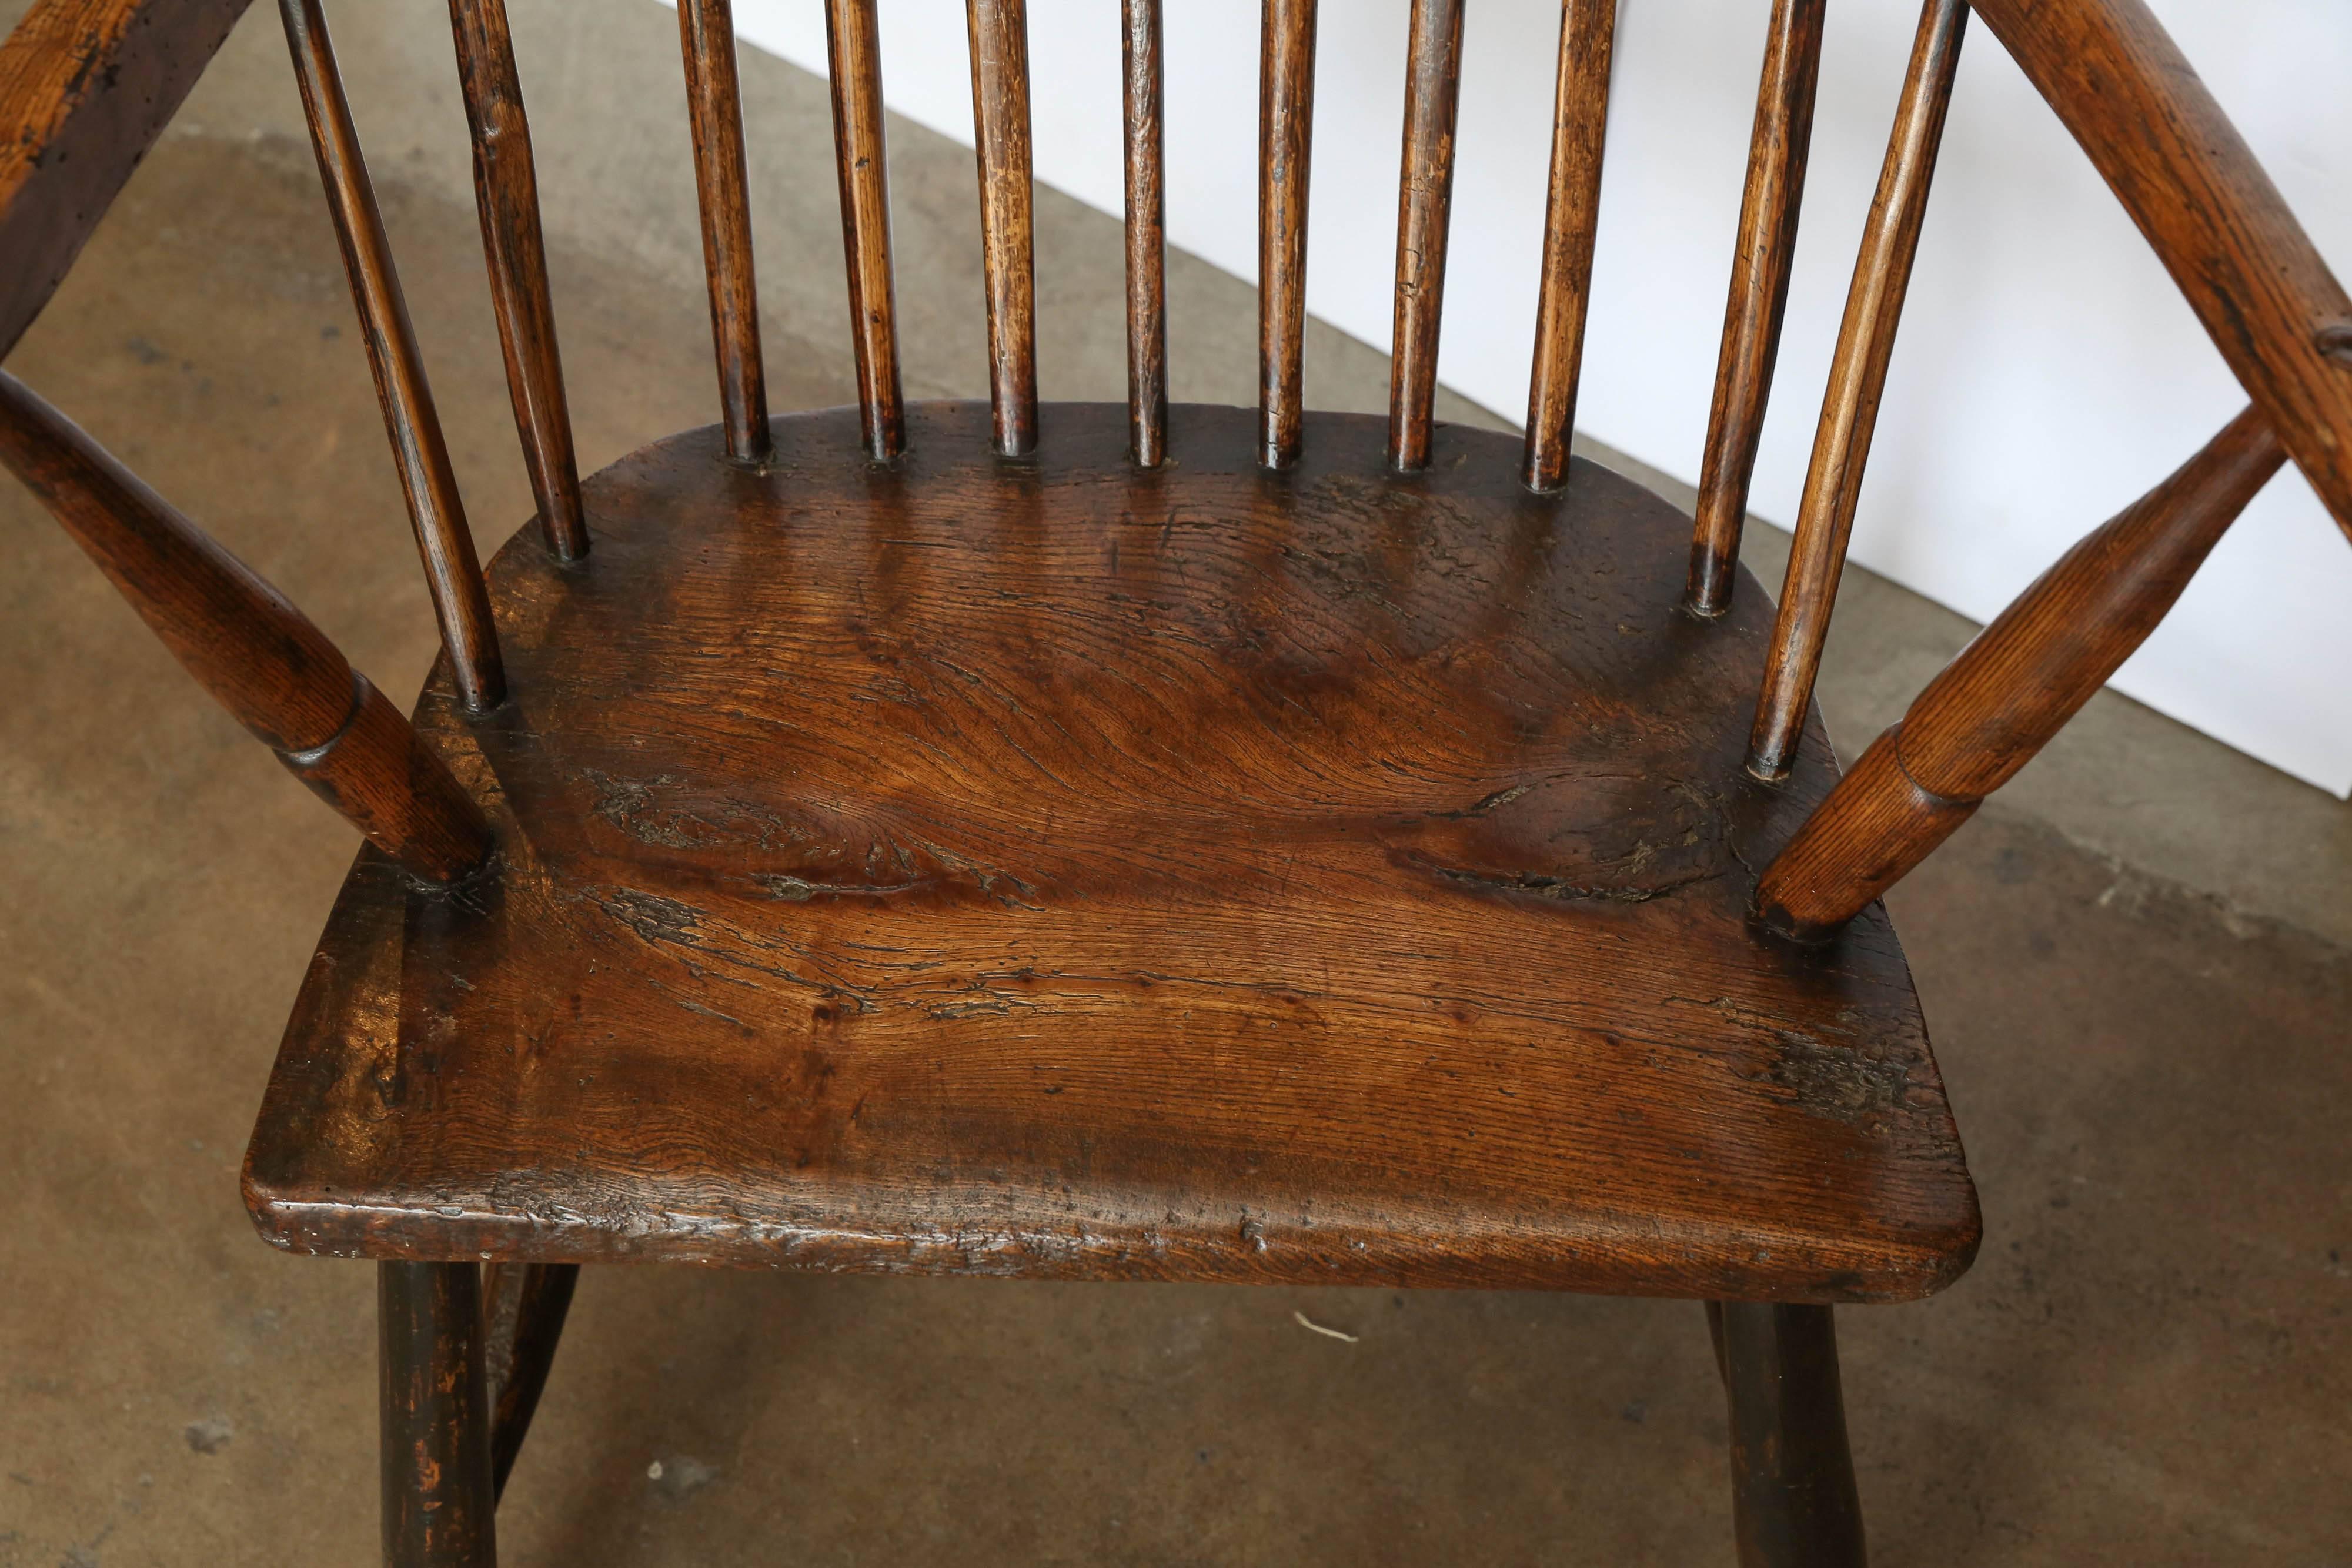 Beautiful example of a craftsman windsor chair. Most likely from the late 18th century or early 19th century. Made out of elm. Beautiful lines and patina. A treasure!